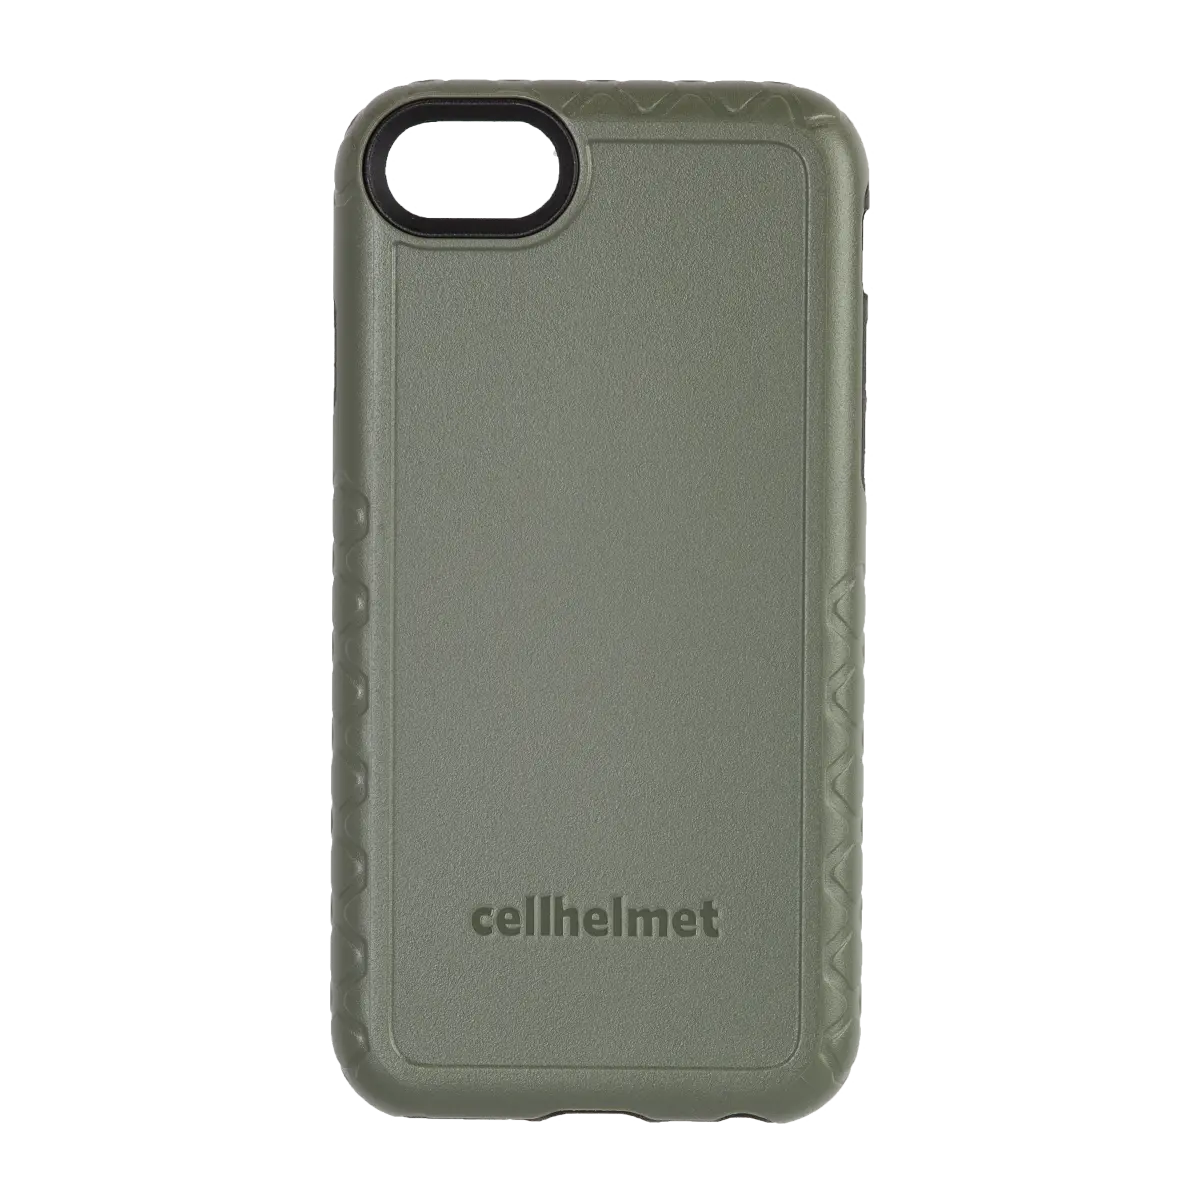 Olive Green cellhelmet Personalized Case for iPhone SE 2020